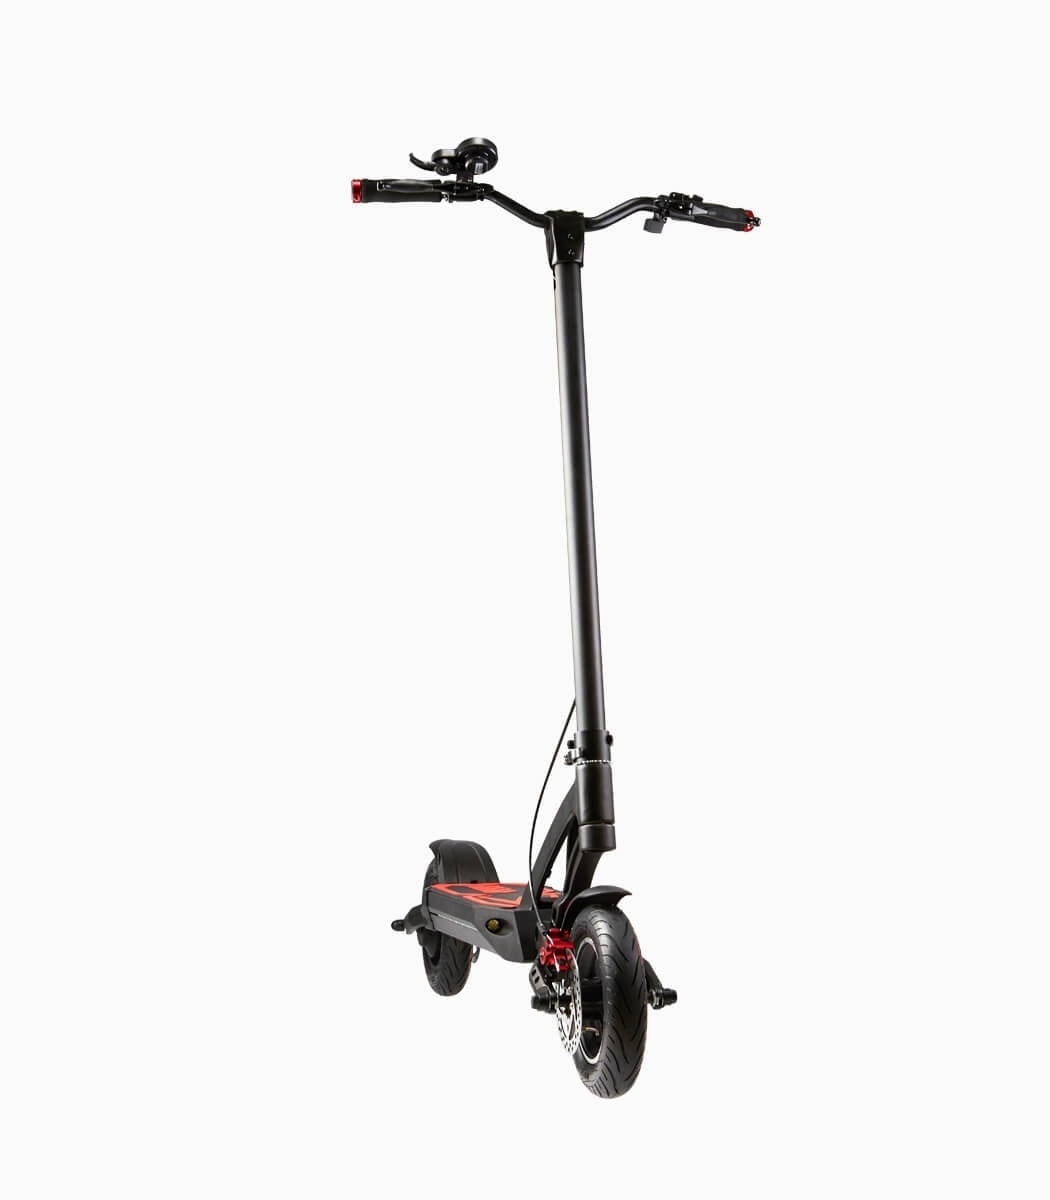 MOBOT MANTIS (RED10AH) UL2272 certified high performance electric scooter angled right